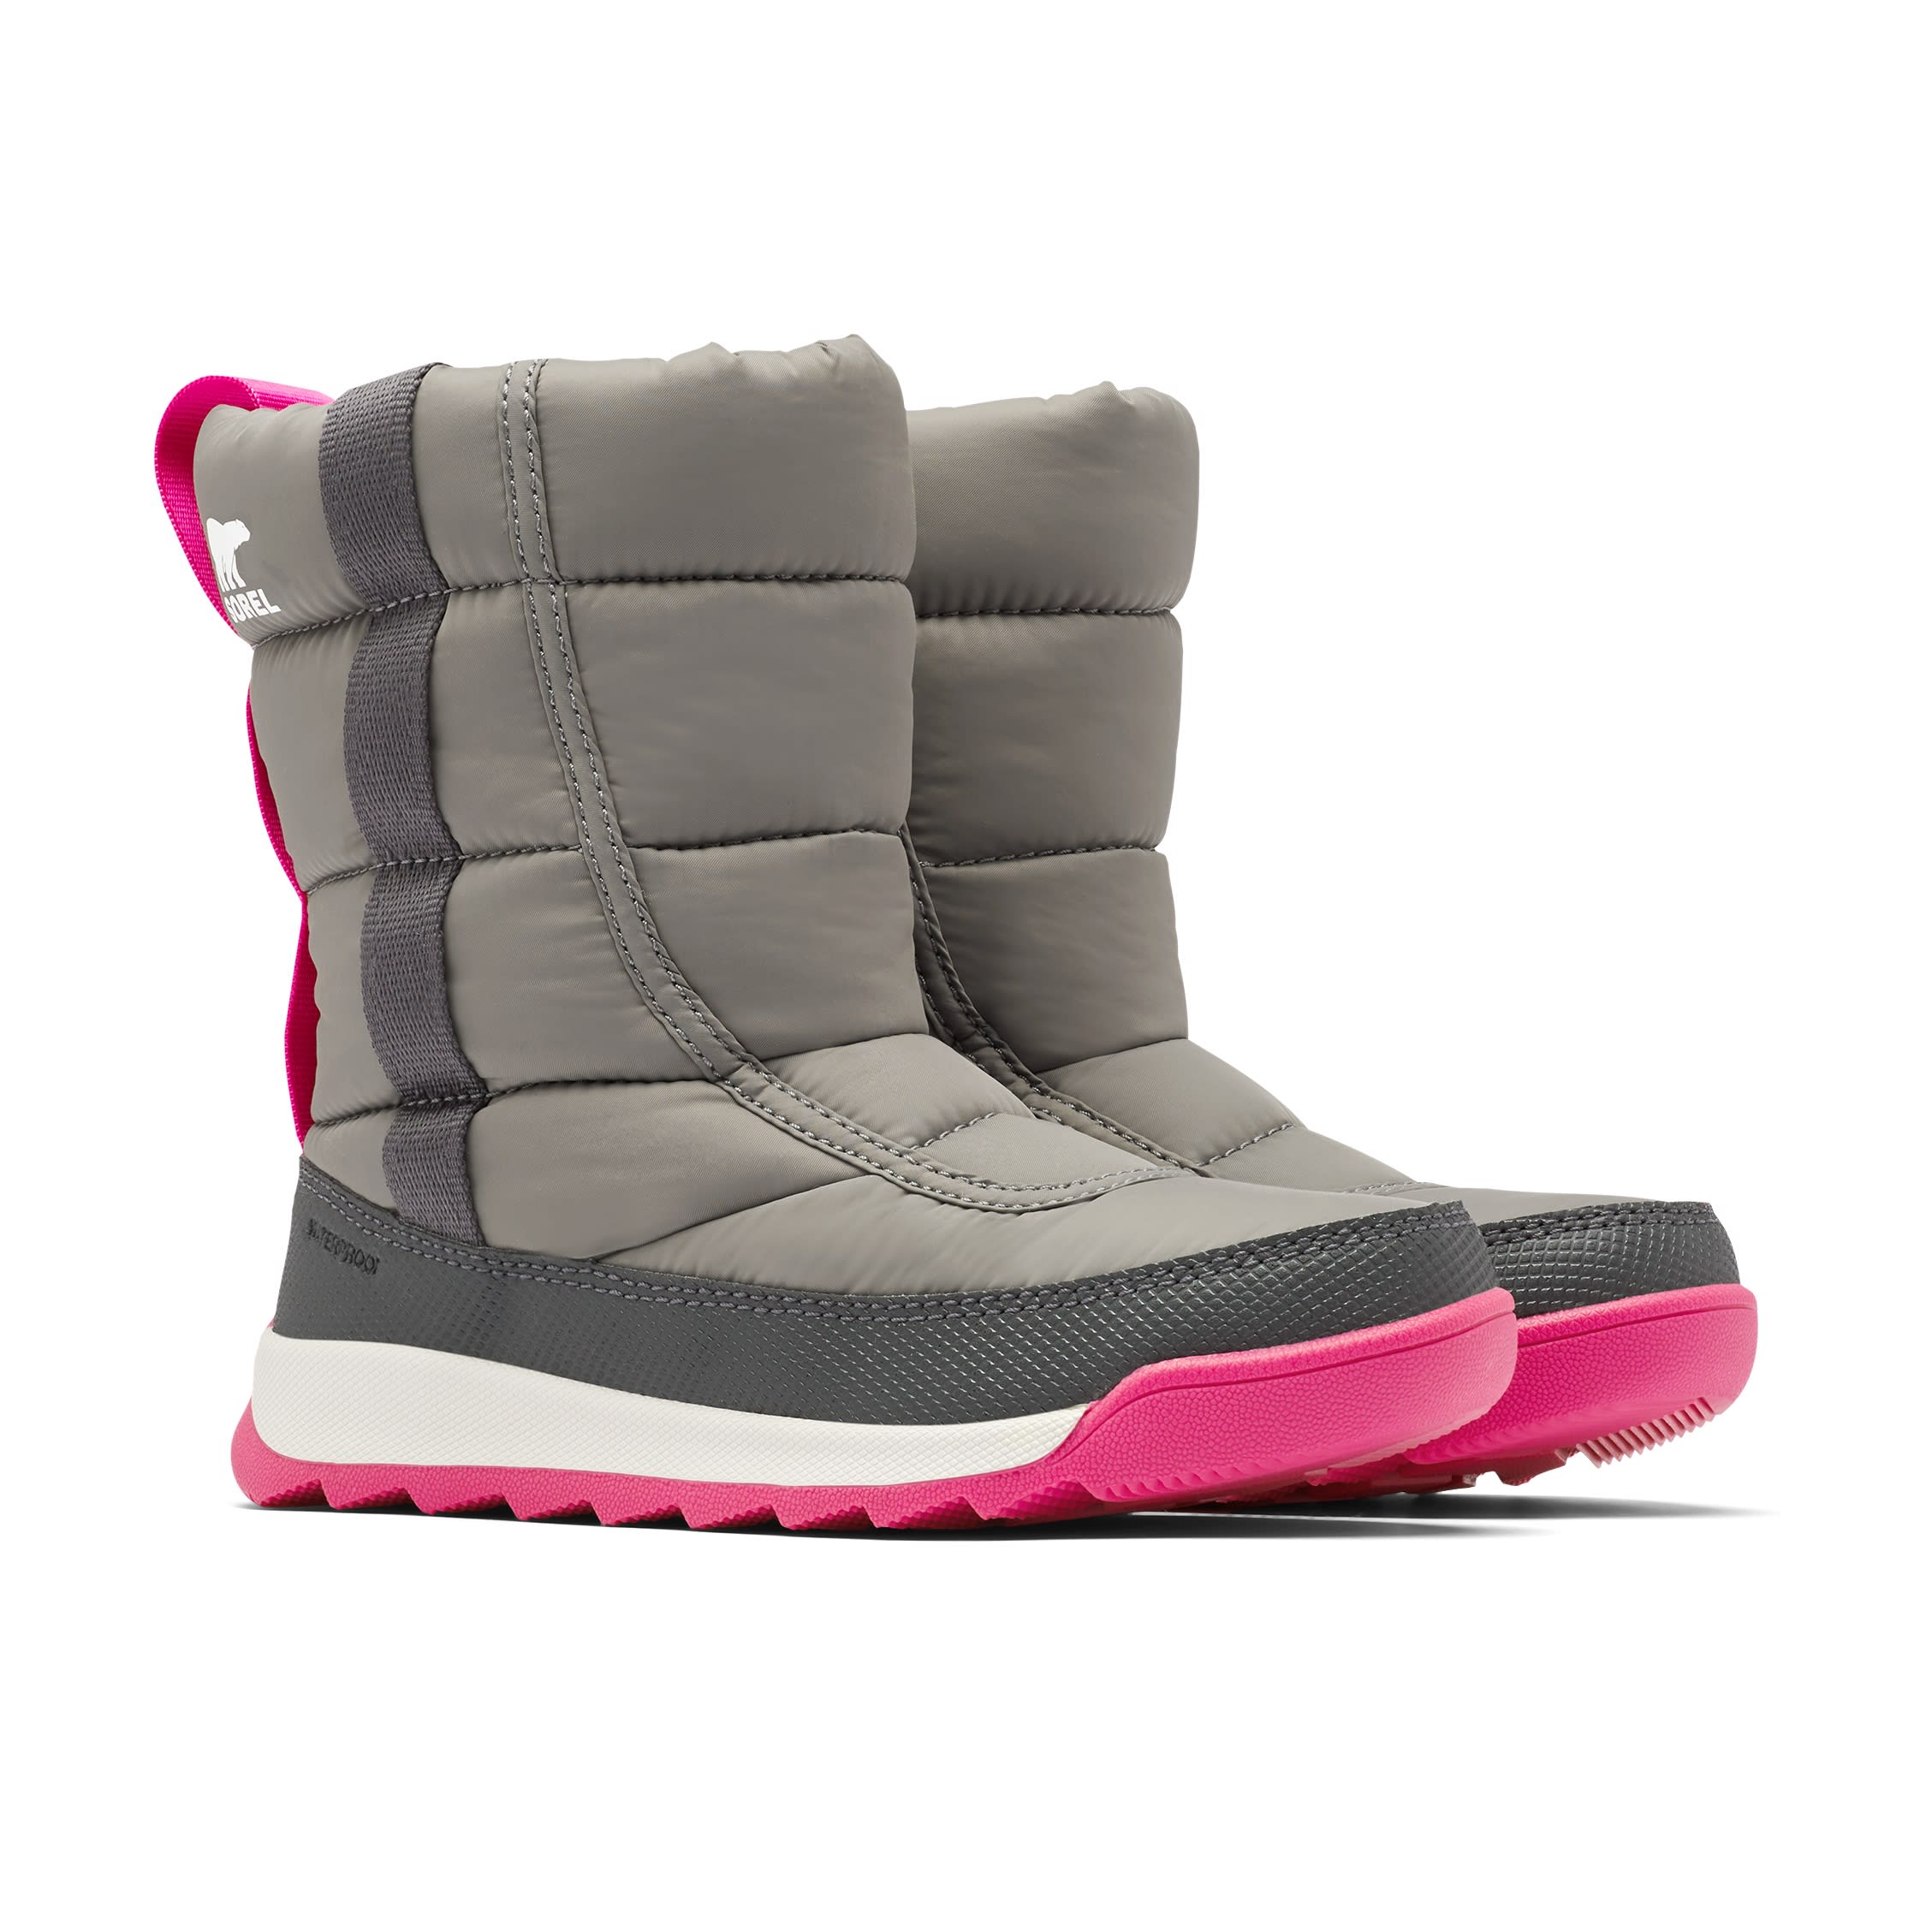 Buy Sorel Youth II from Outnorth